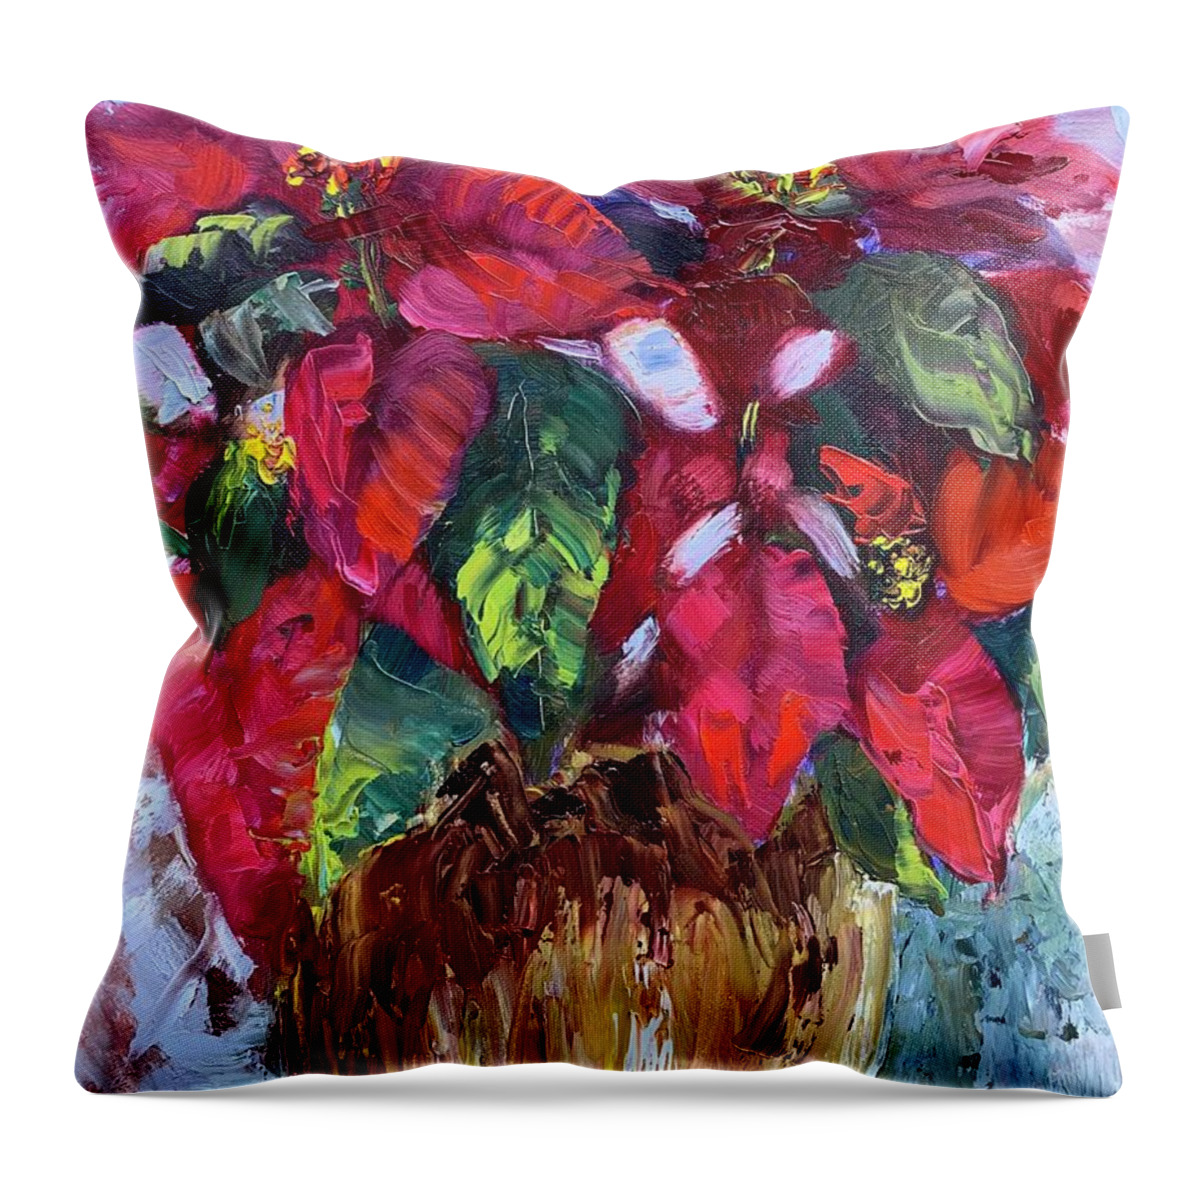 Poinsettia Throw Pillow featuring the painting Poinsettia by Melissa Torres